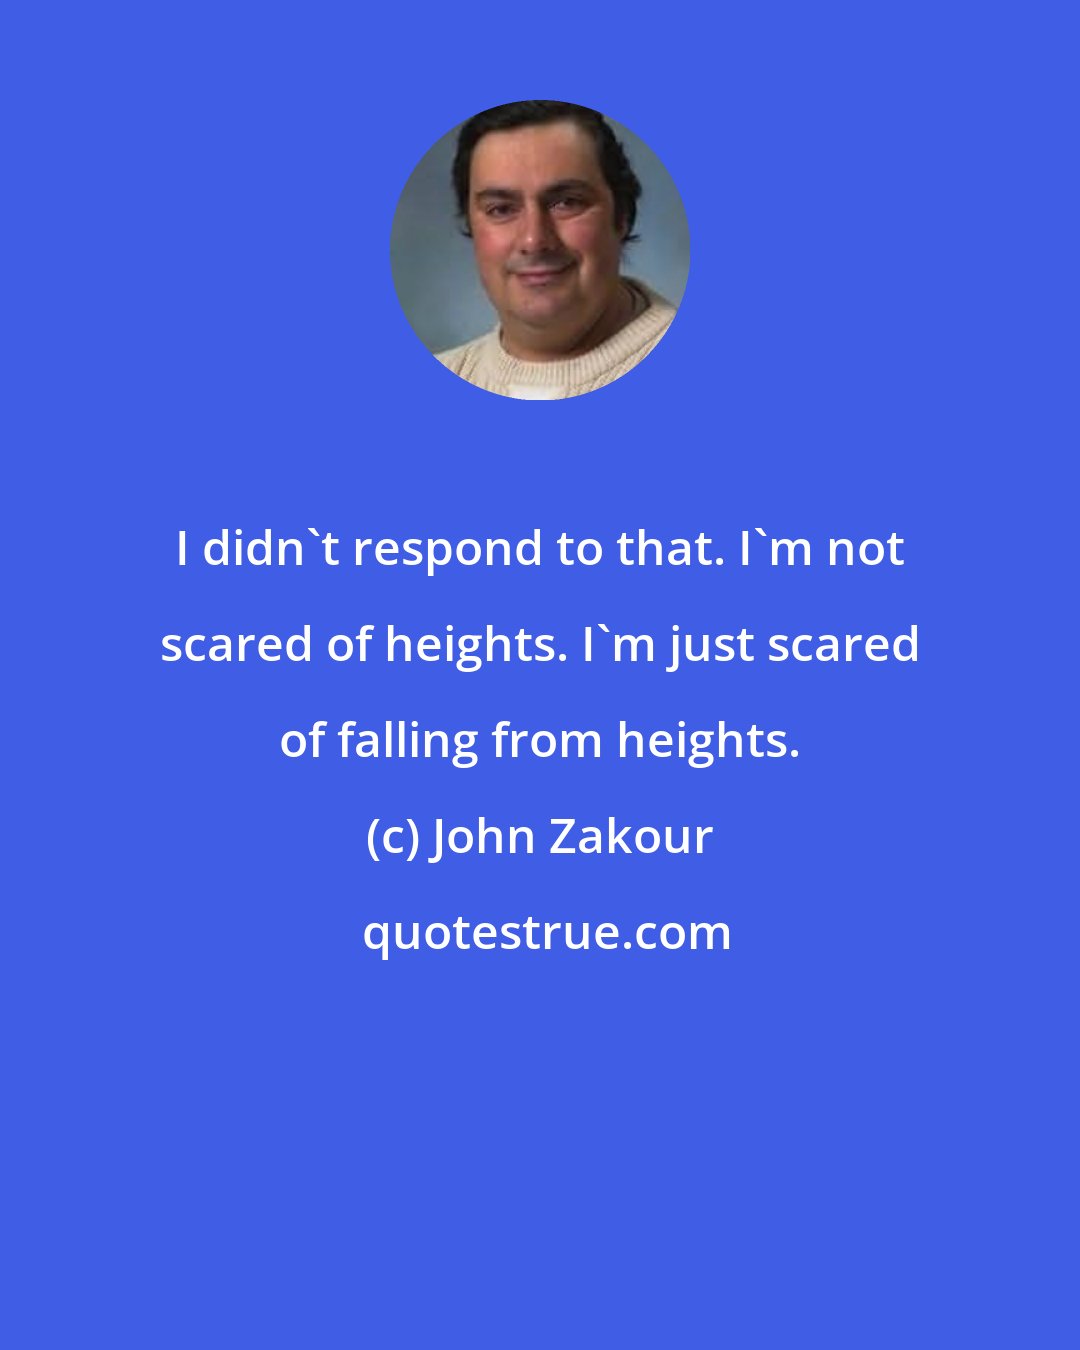 John Zakour: I didn't respond to that. I'm not scared of heights. I'm just scared of falling from heights.